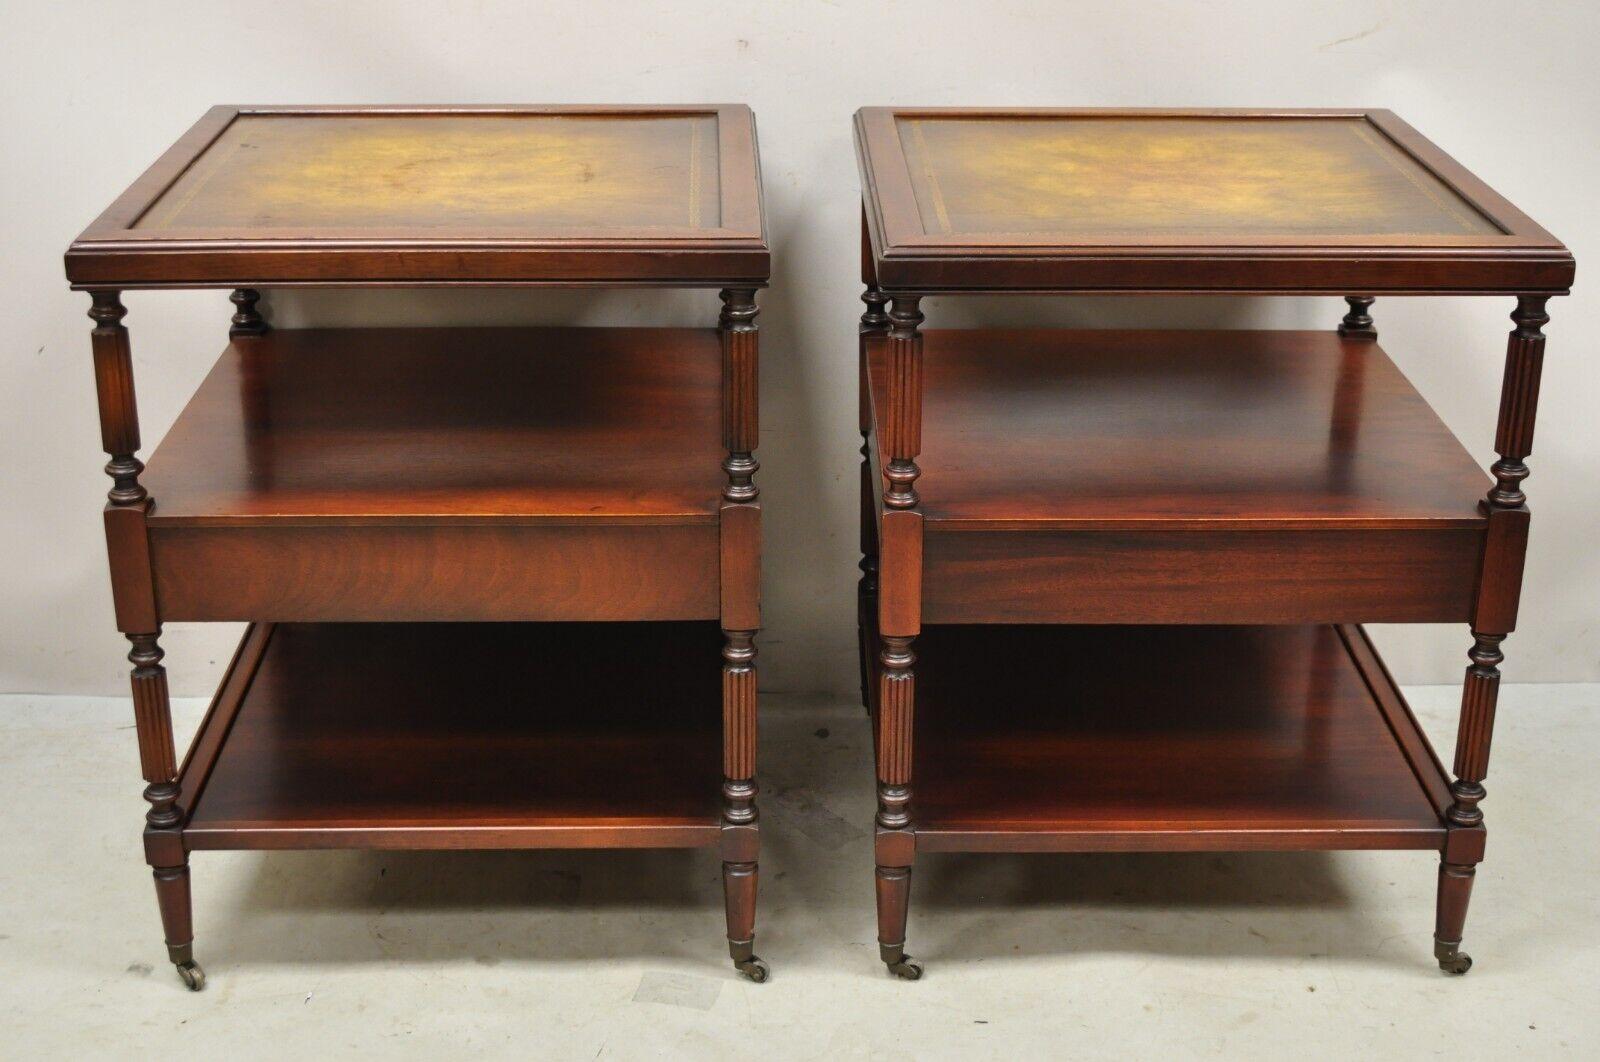 Vintage Georgian Style 3 Tier Leather Top Mahogany End Tables w/ Drawer - a Pair 5